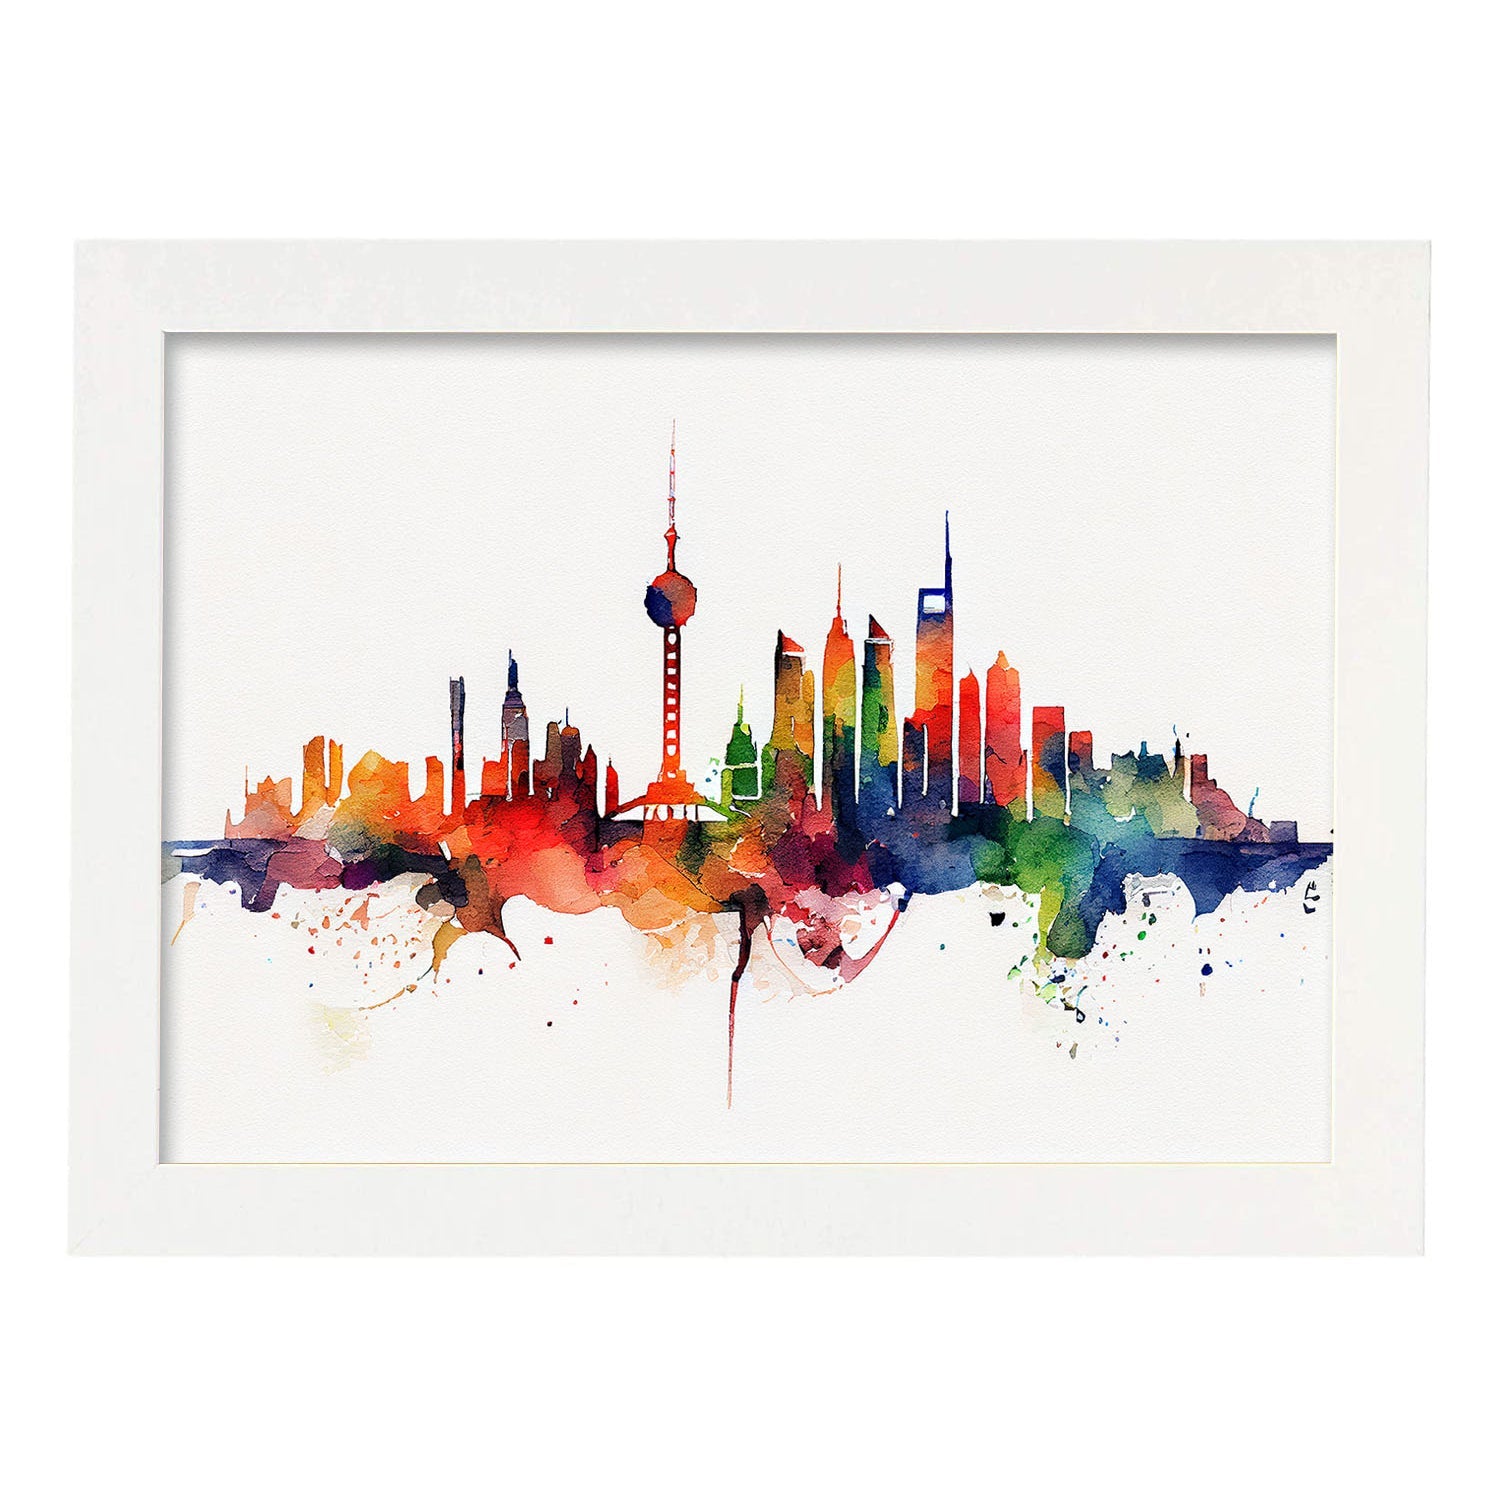 Nacnic watercolor of a skyline of the city of Shanghai_4. Aesthetic Wall Art Prints for Bedroom or Living Room Design.-Artwork-Nacnic-A4-Marco Blanco-Nacnic Estudio SL